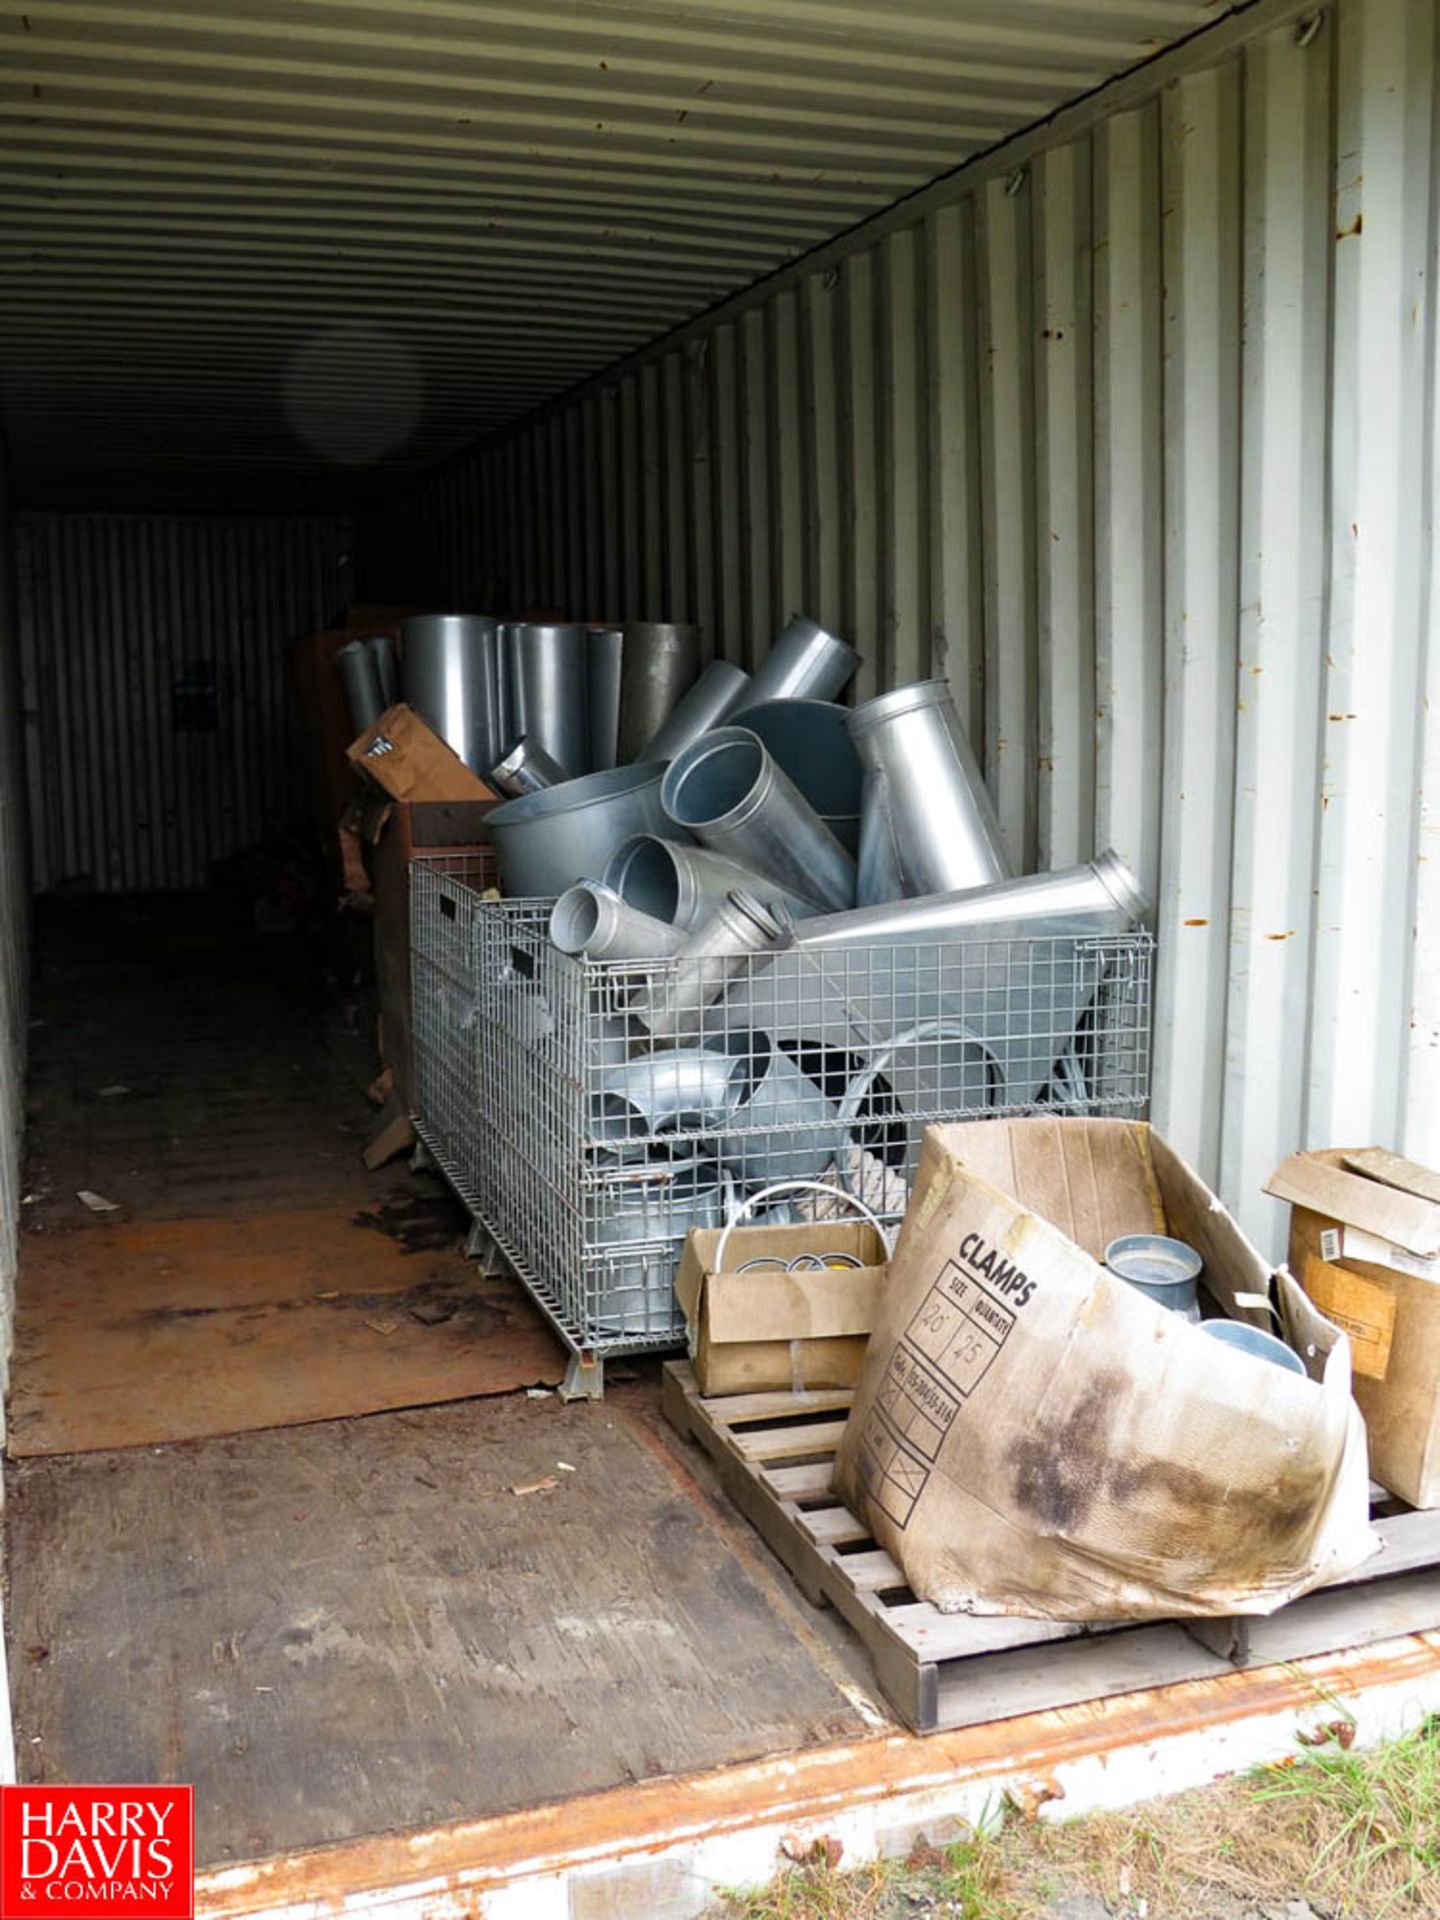 Contents of Connex to Include: Assorted Metal Ducting